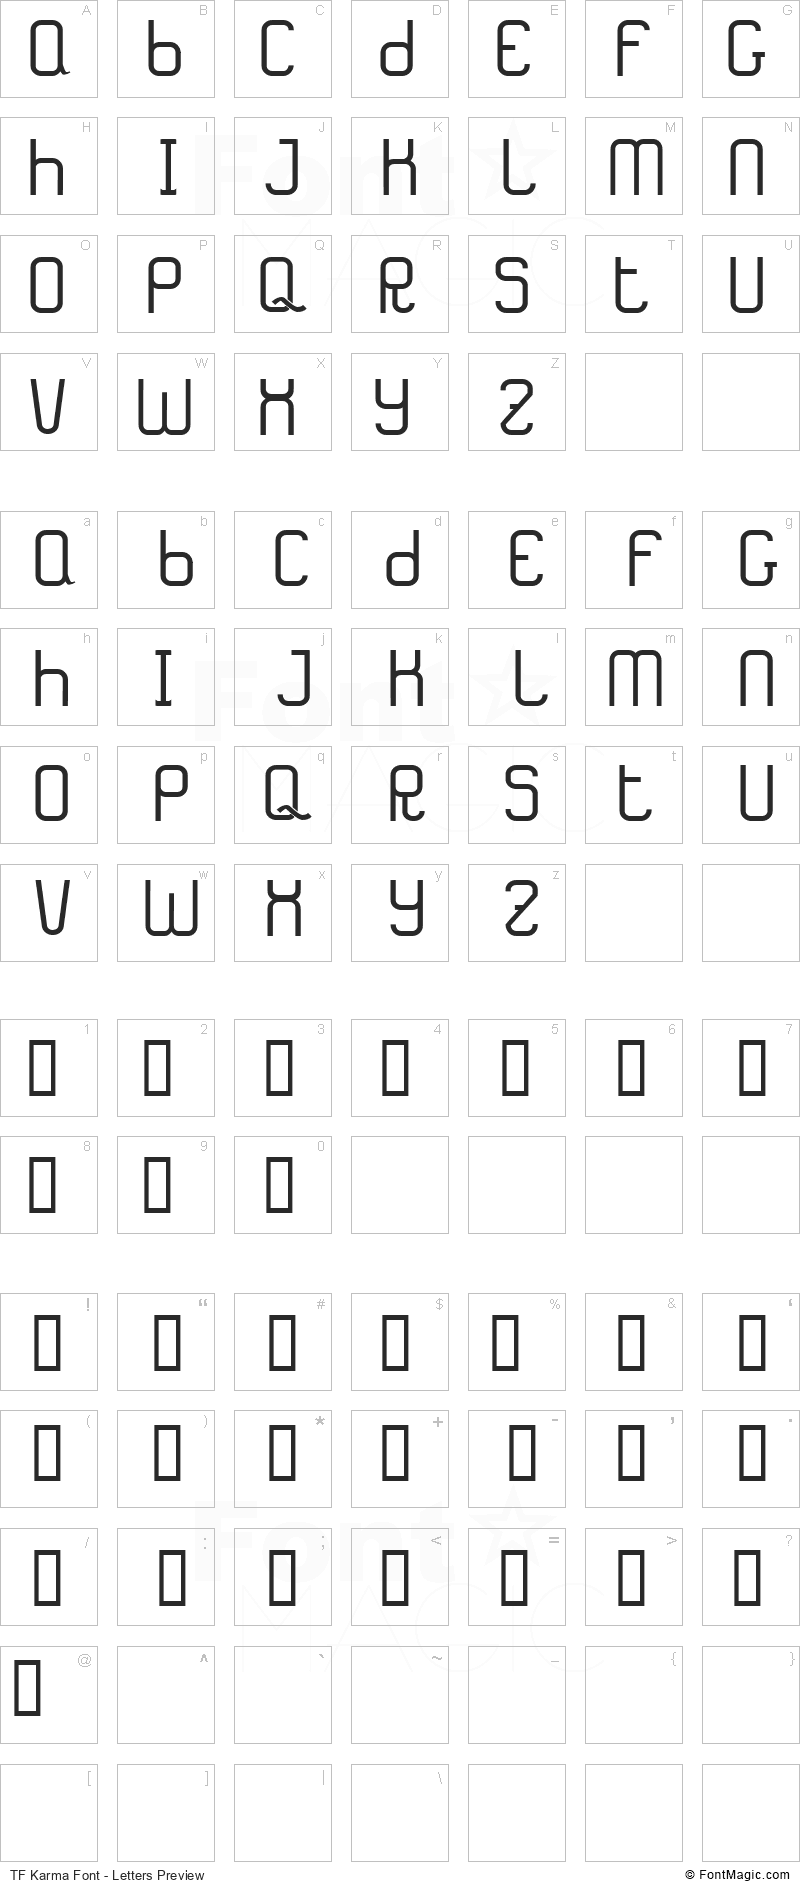 TF Karma Font - All Latters Preview Chart